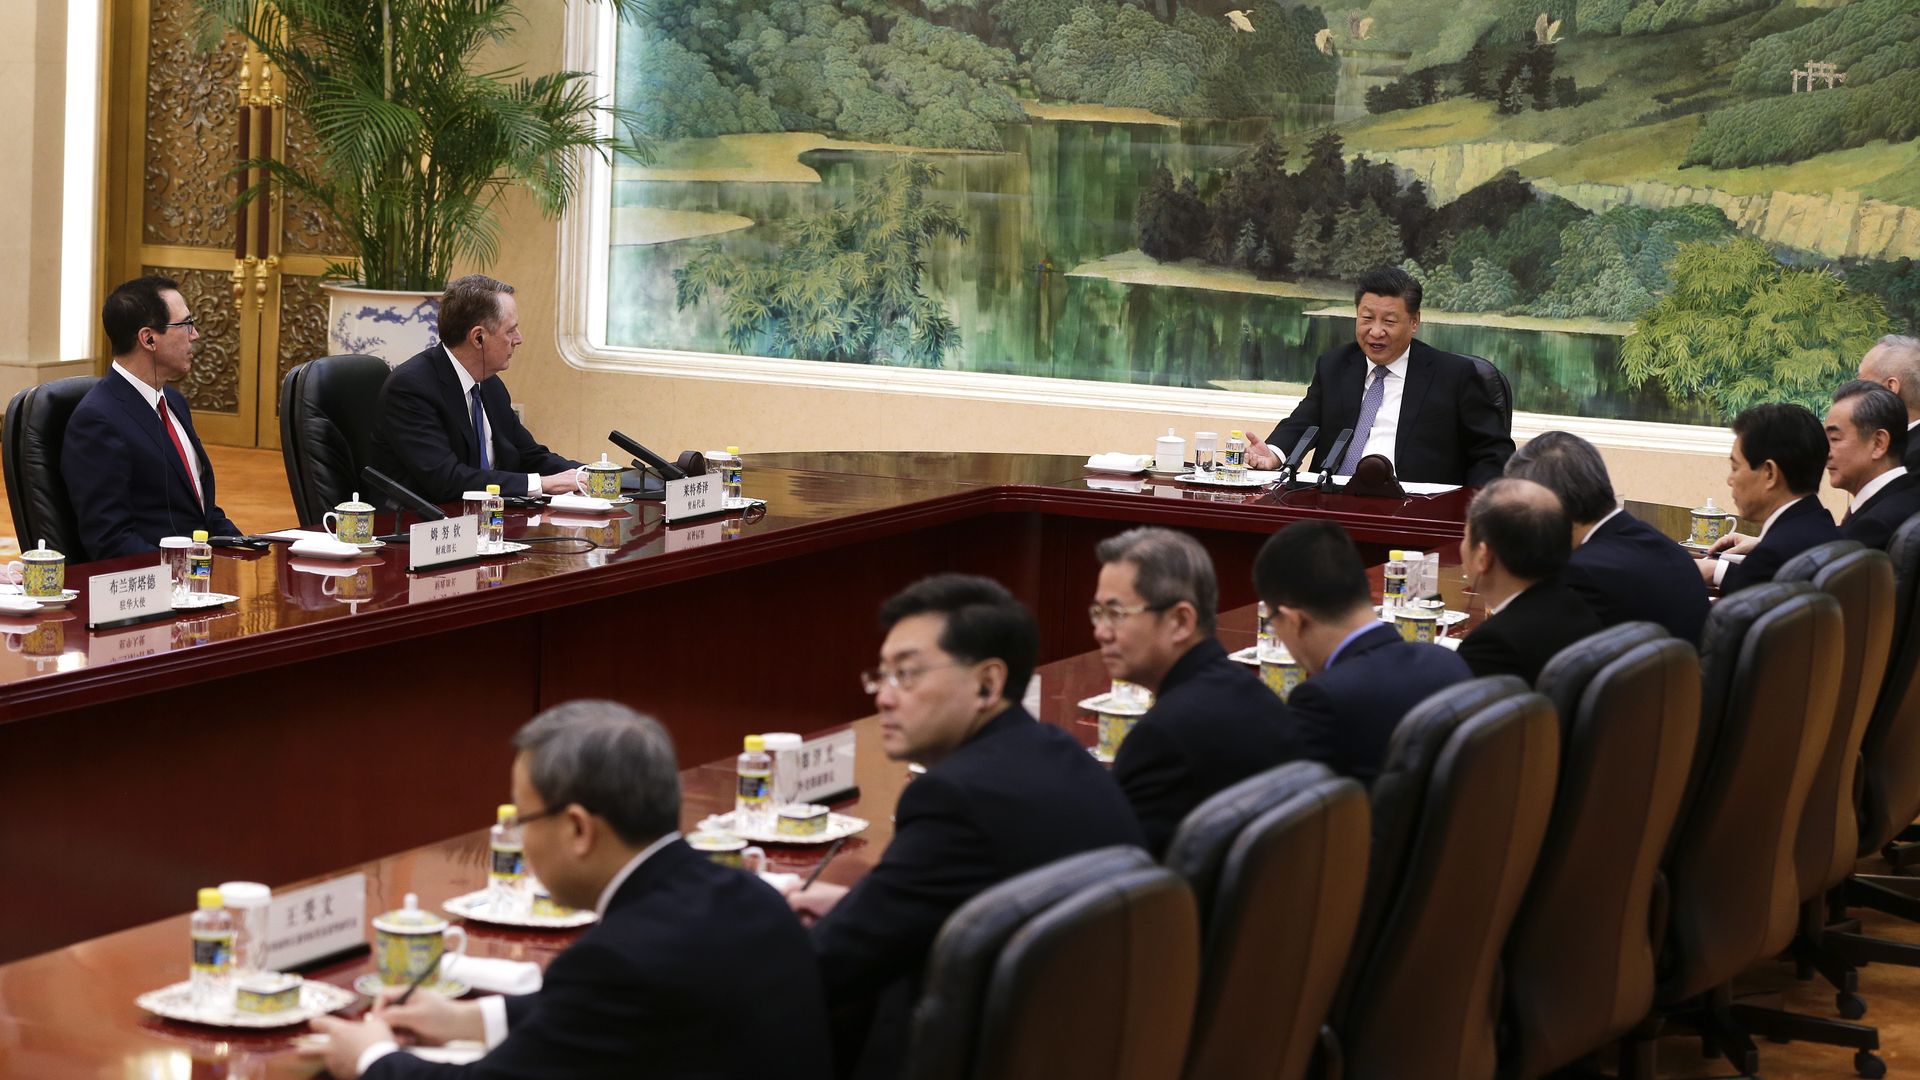 In this image, Chinese President Xi Jinping speaks at a trade summit along with U.S. representatives. 